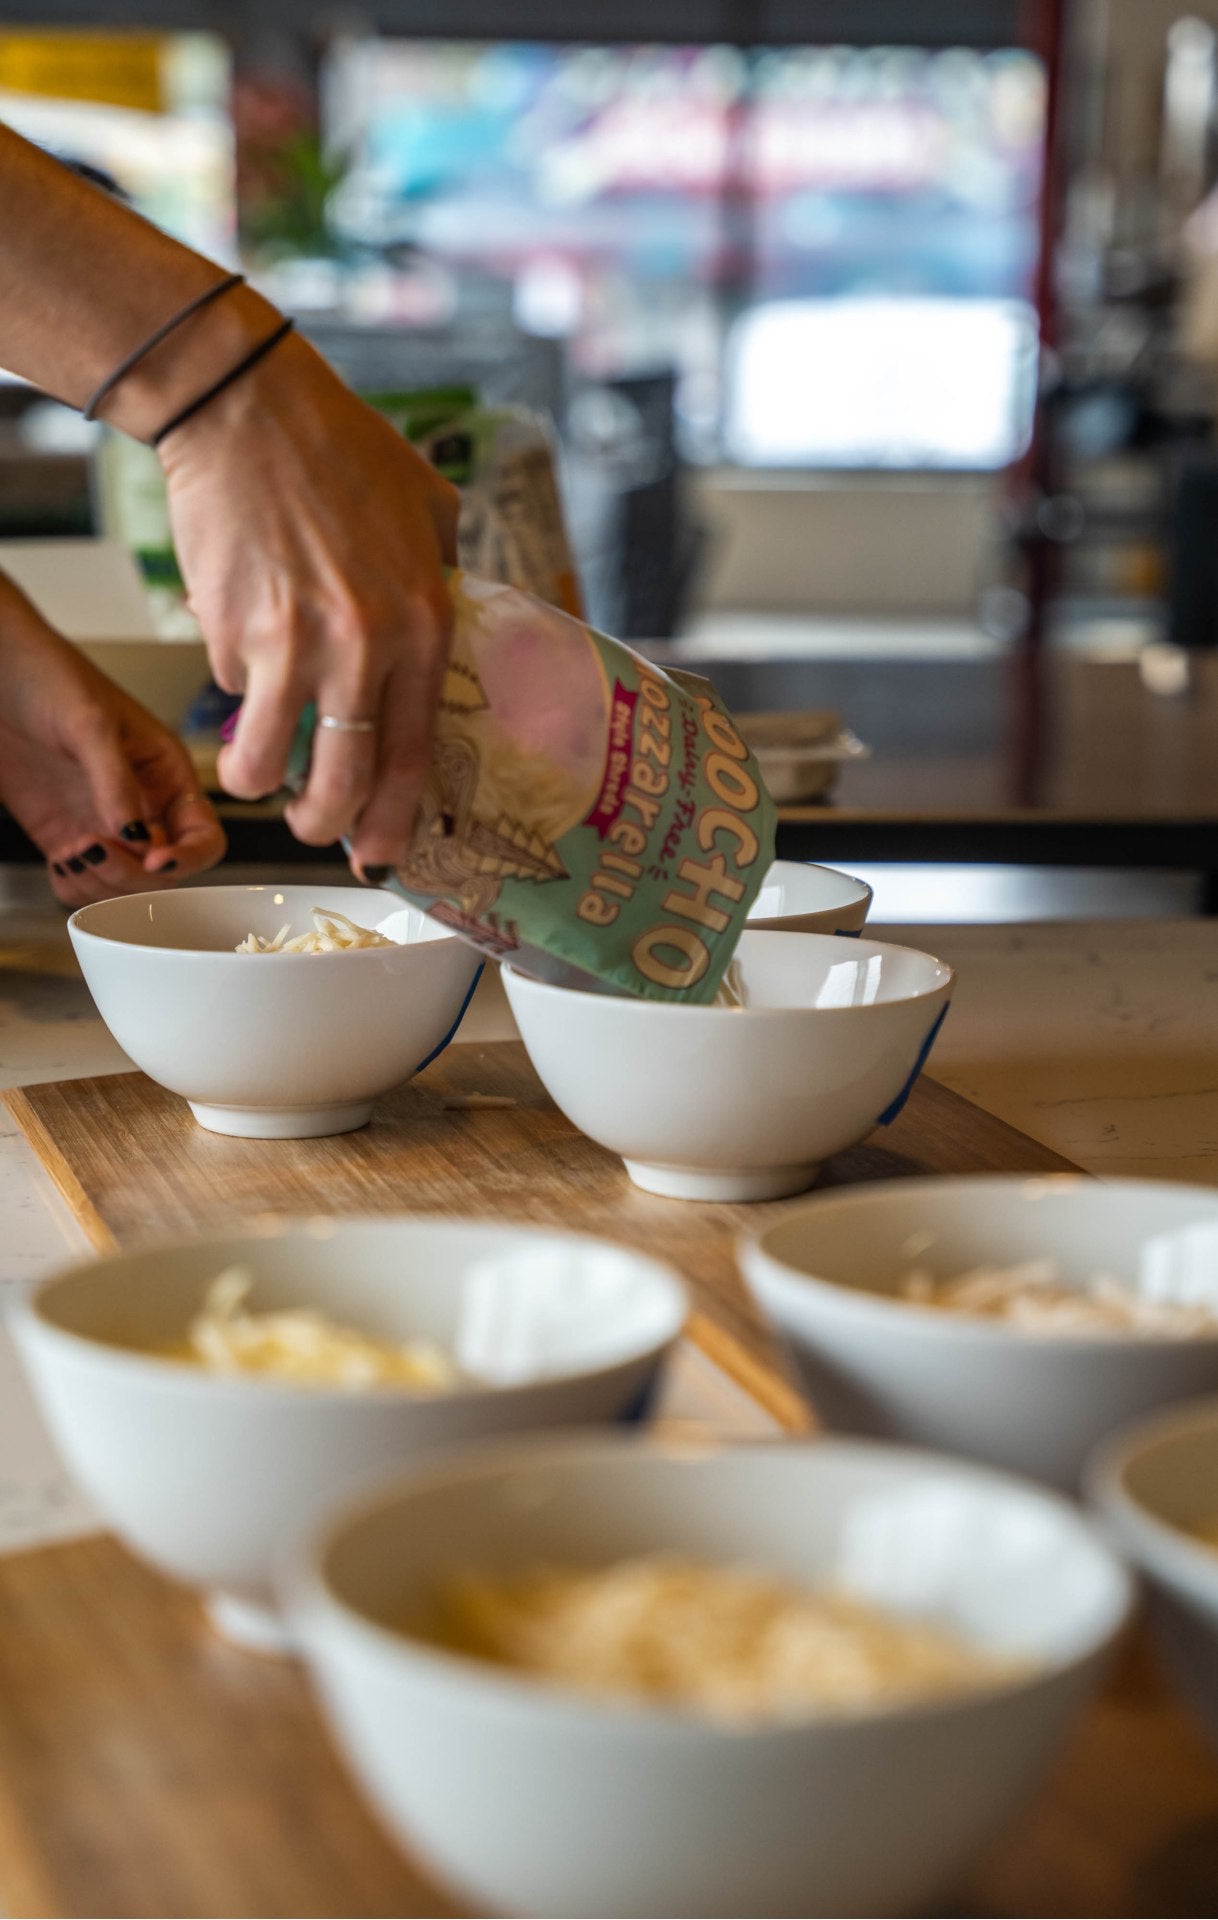 Vegan cheese being poured into bowls